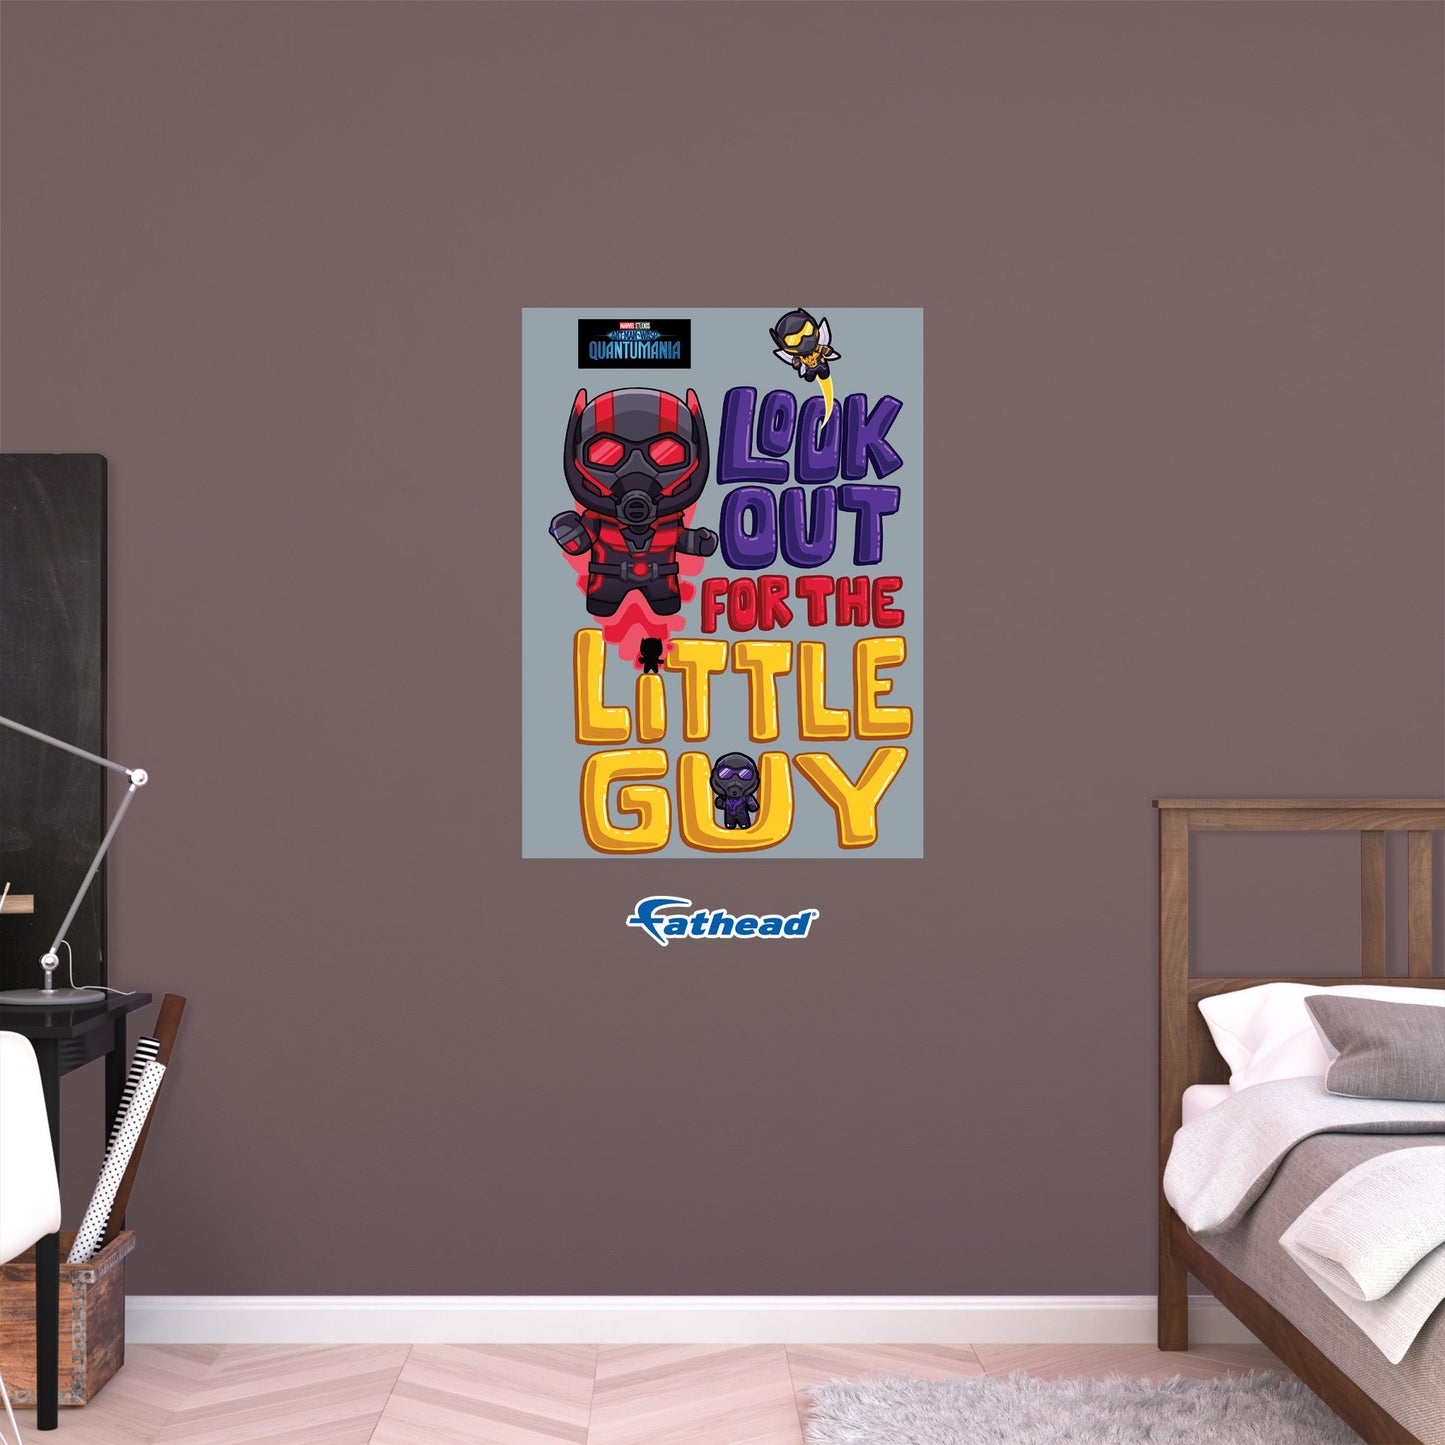 Ant-Man and the Wasp Quantumania: Little Guy Poster - Officially Licensed Marvel Removable Adhesive Decal